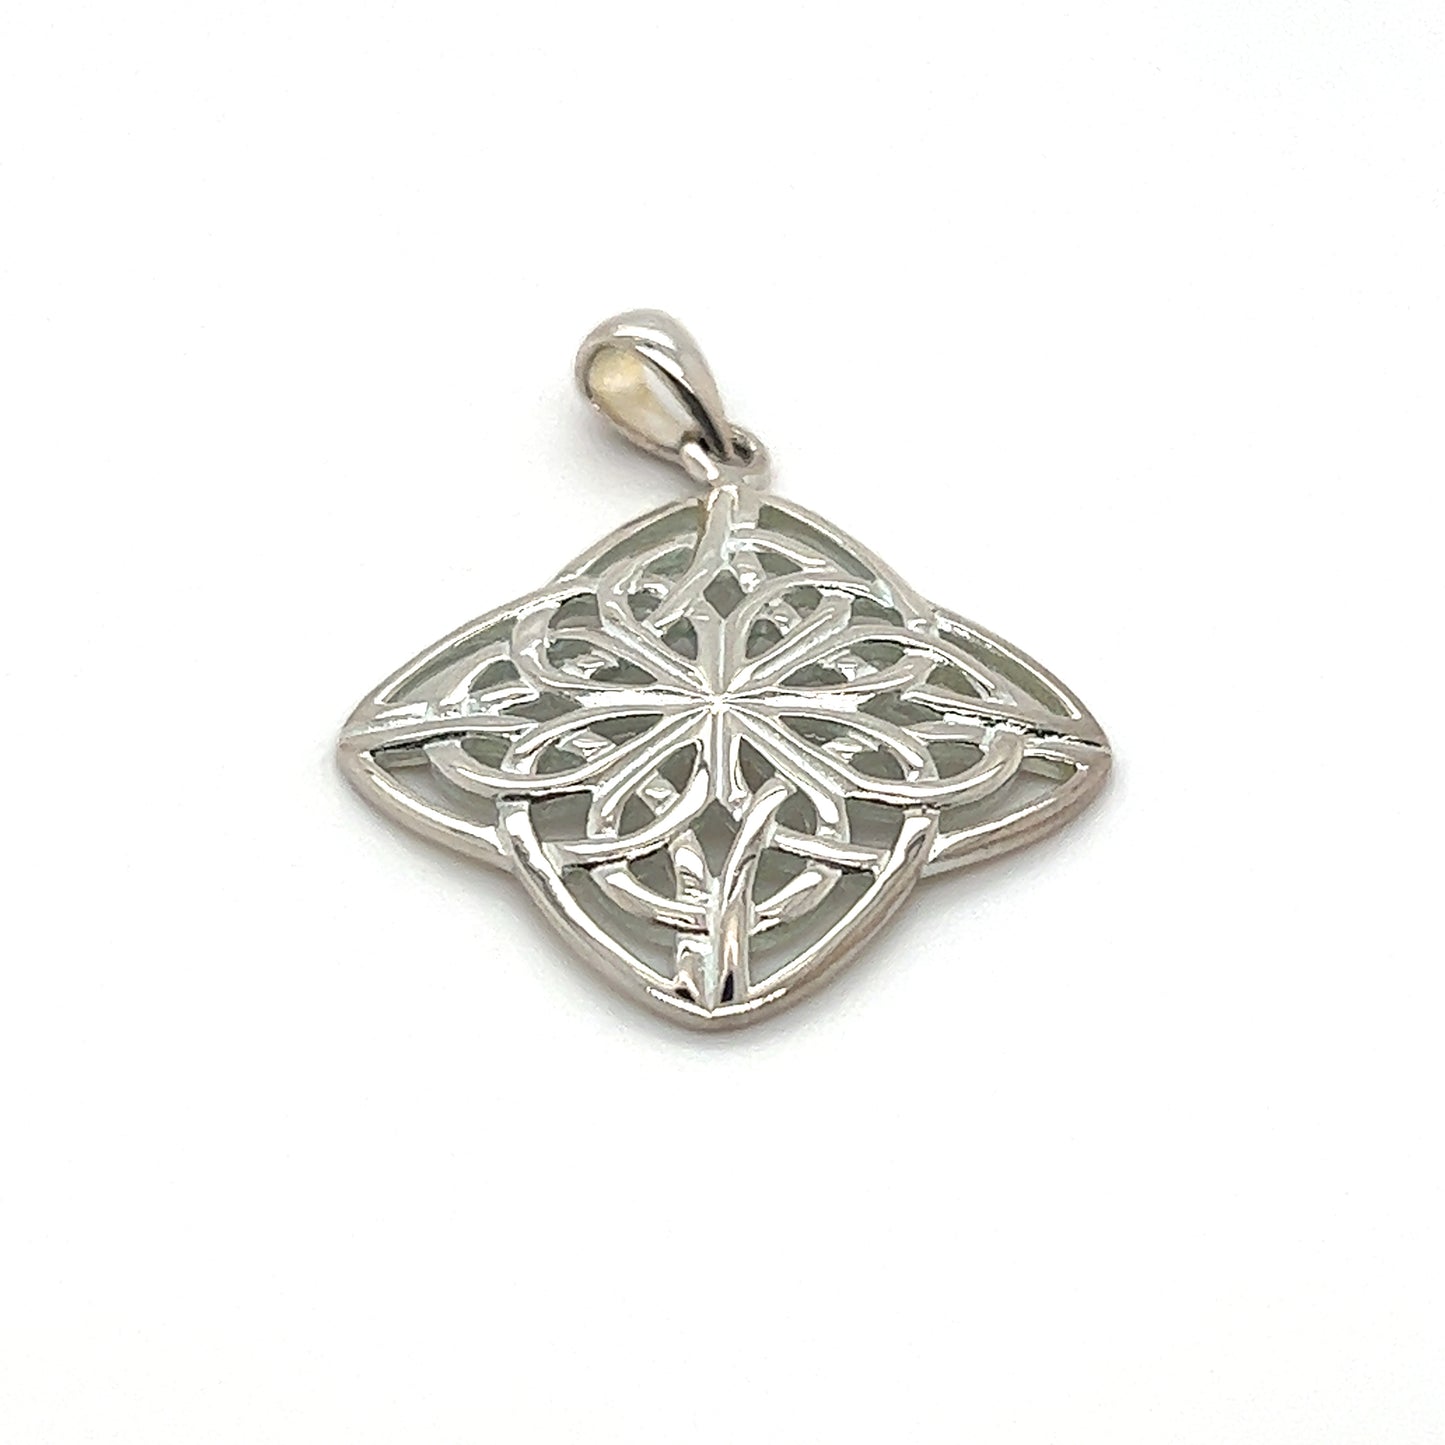 This Square Celtic Knot Pendant, crafted from sterling silver, showcases an intricate design with profound symbolism.